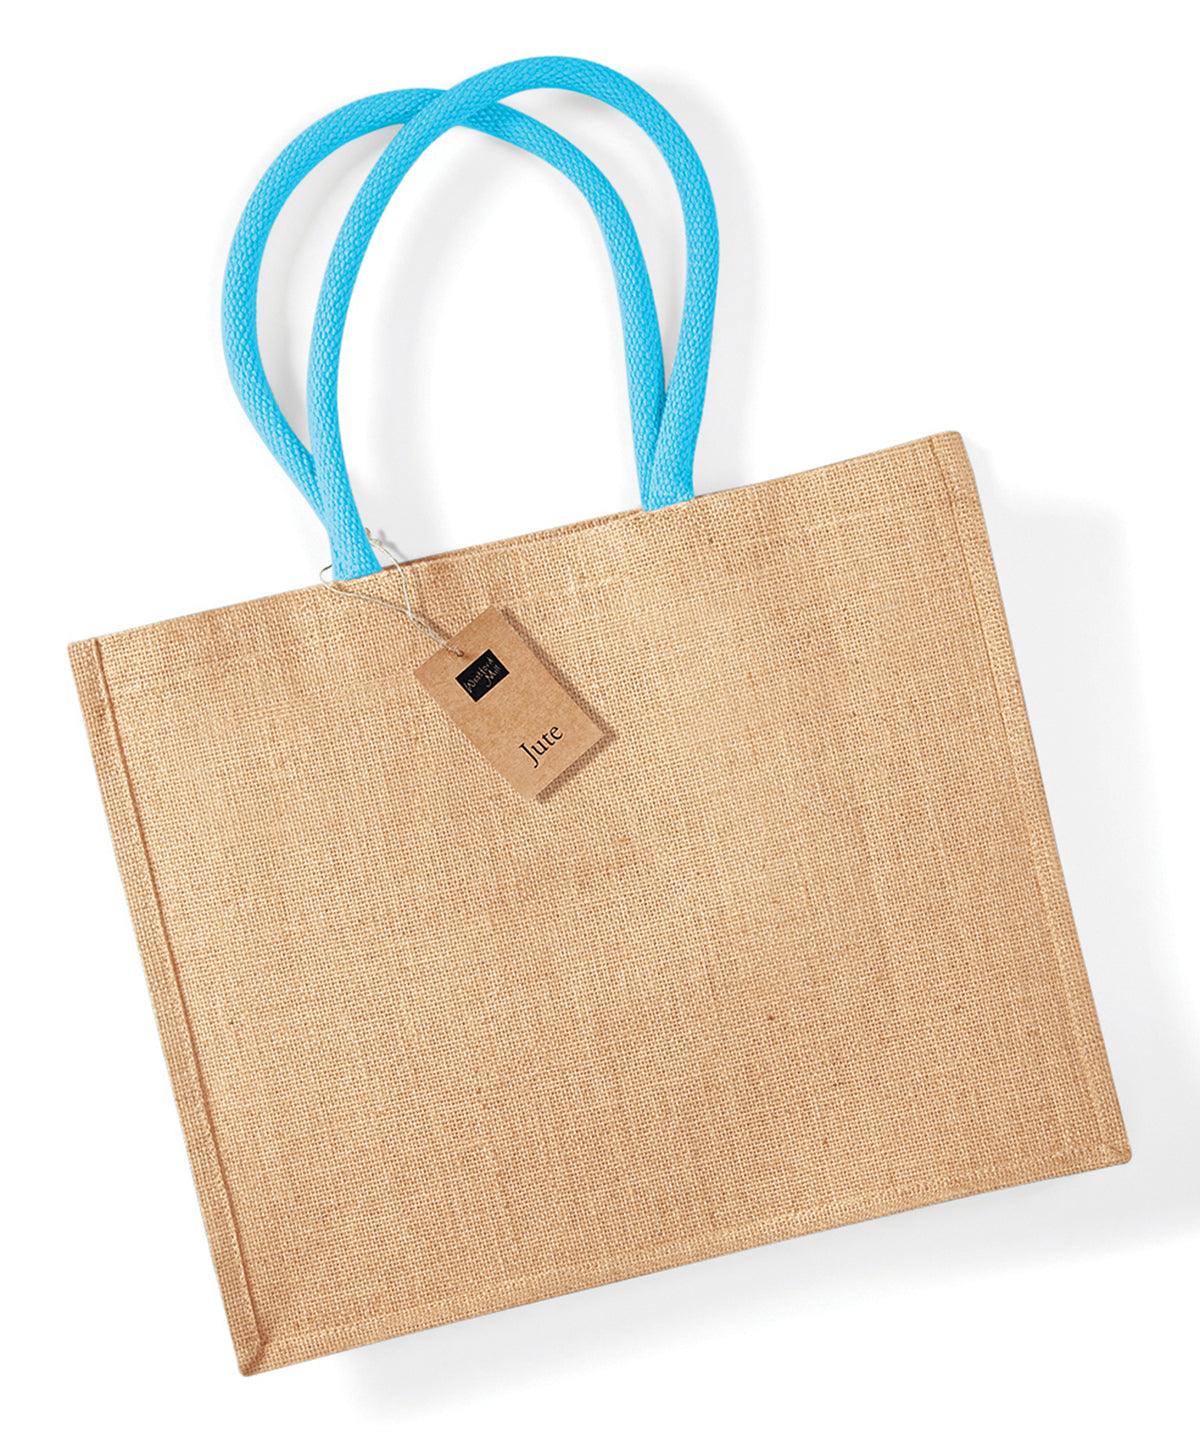 Natural/Surf Blue - Jute classic shopper Bags Westford Mill Bags & Luggage, Must Haves Schoolwear Centres